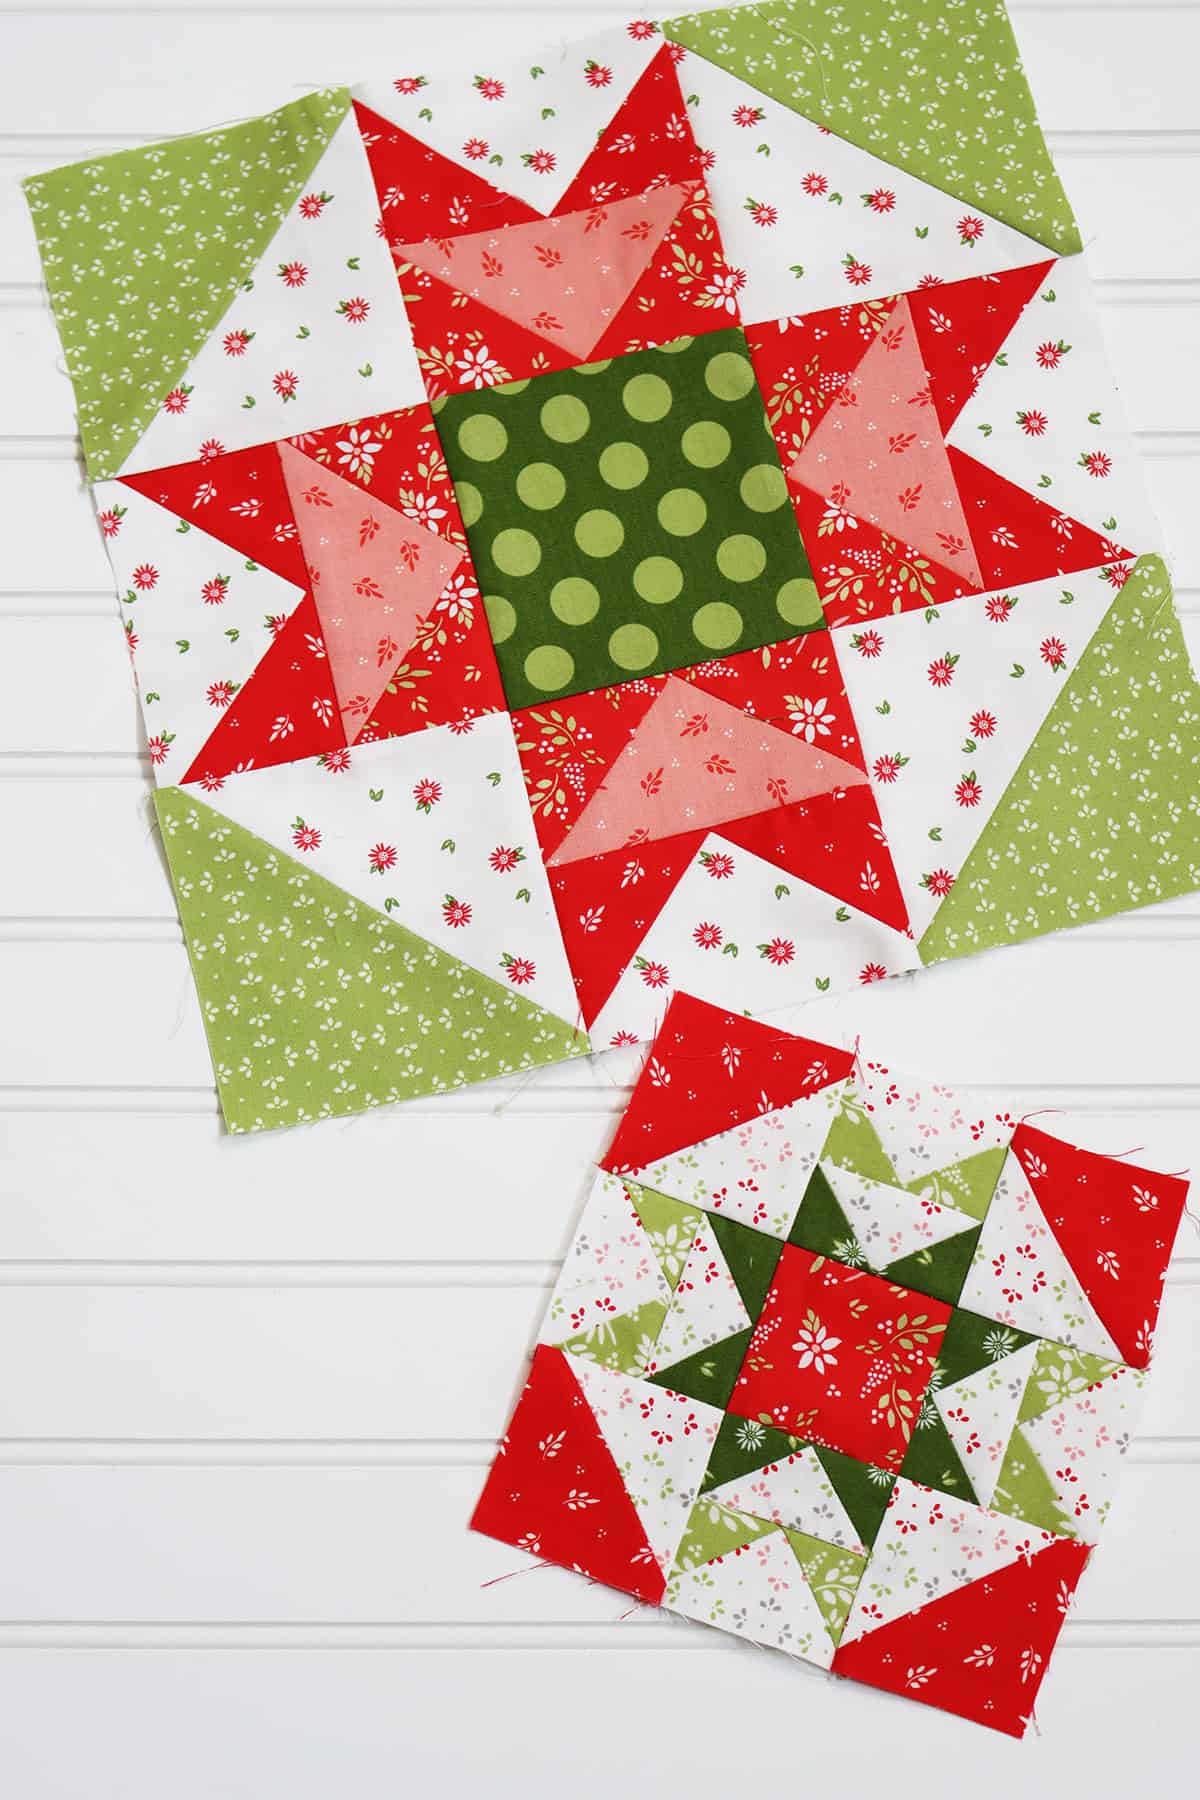 Quilt Block of the Month March 2023 featured by Top US Quilt Blog, A Quilting Life